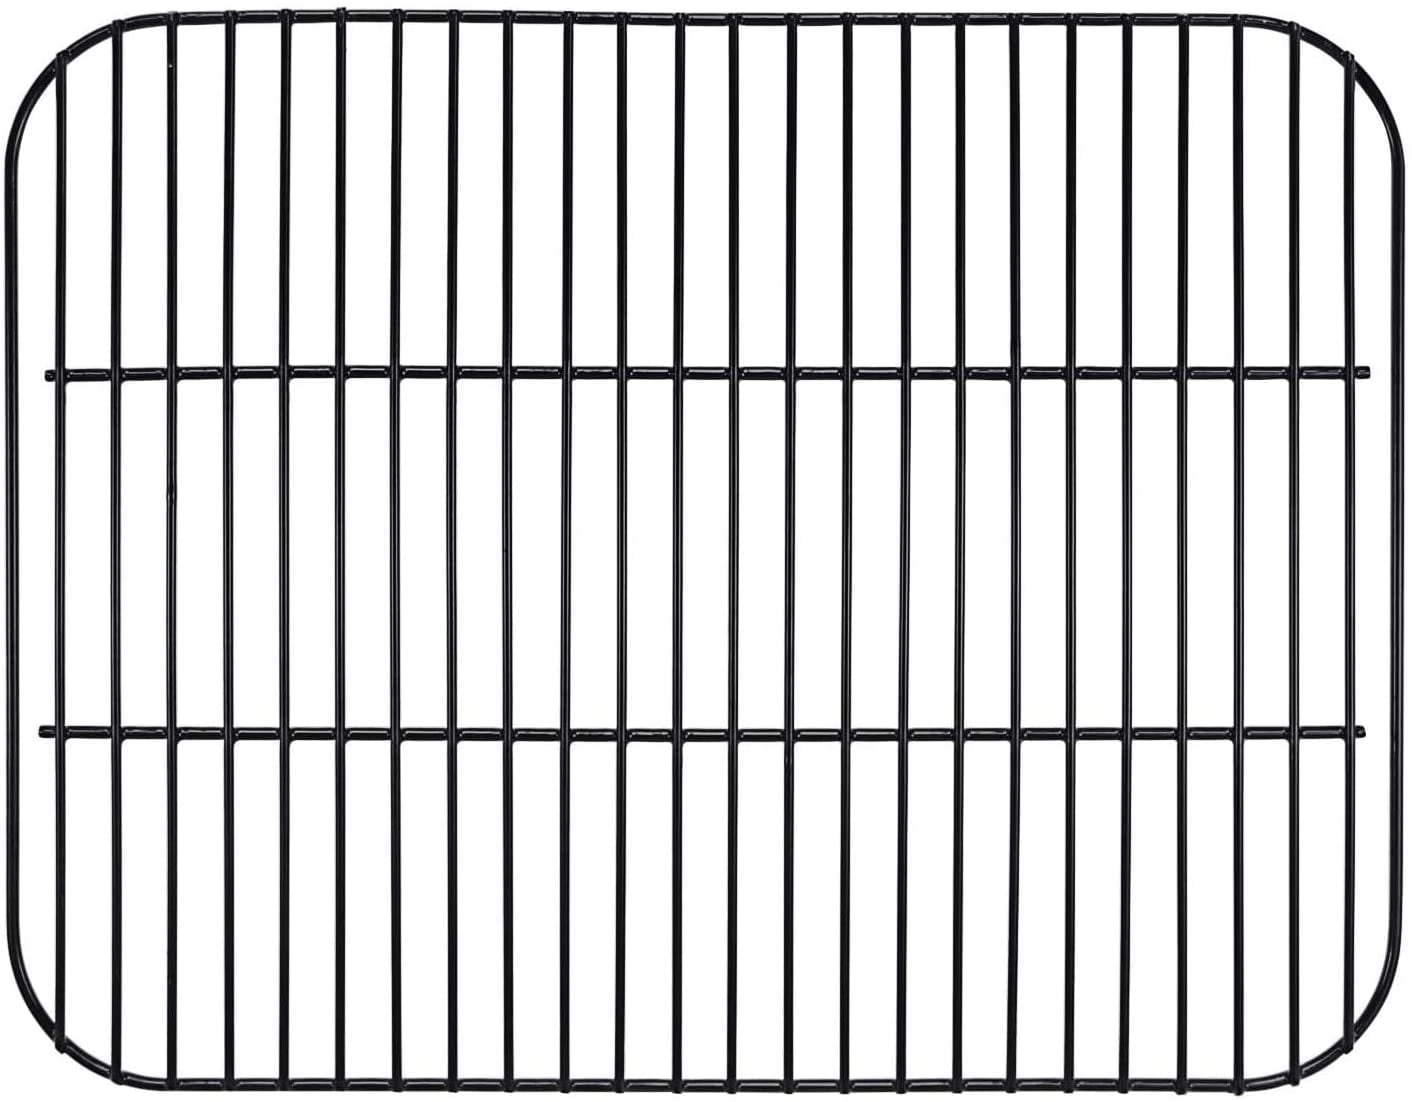 810-3821-F Dyna-Glo DGP350NP models SS cooking grid for Brinkmann 810-3820-S